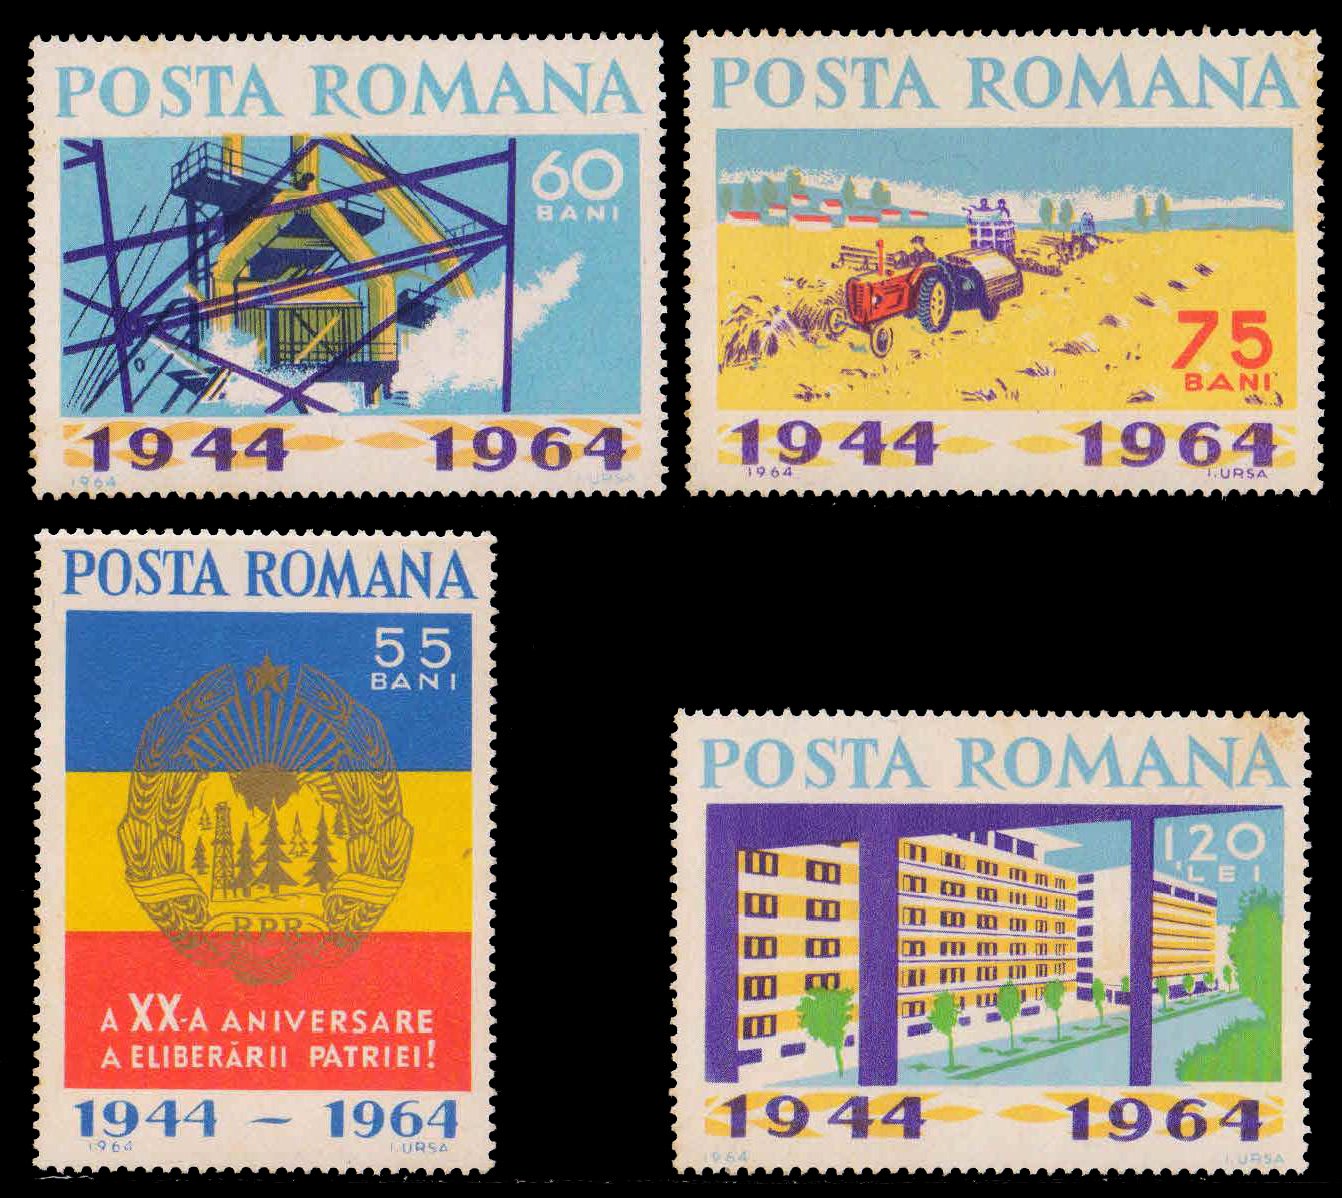 ROMANIA 1964-20th Anniv. of Liberation, Arms, Flag, Buildings, Industry, Harvest, Complete set of 4, MNH, S.G. 3171-74